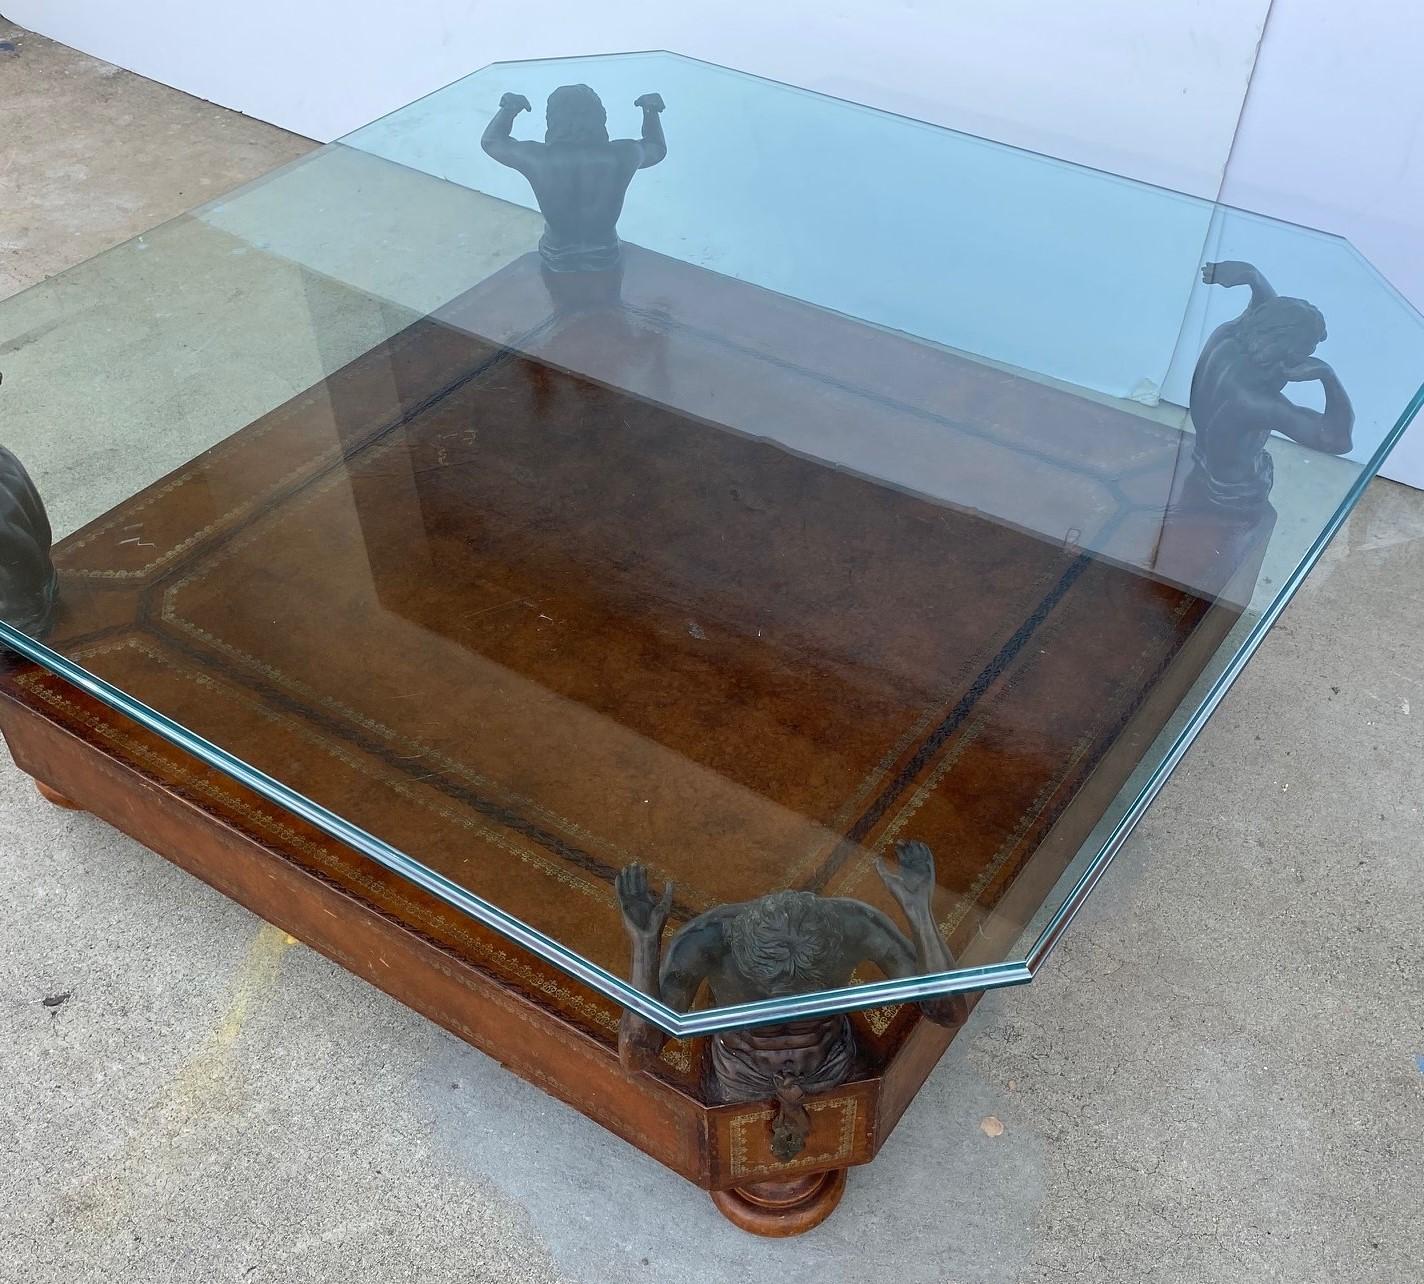 The beveled glass top sits on four bronze figures the bottom shelf is covered in embossed leather.